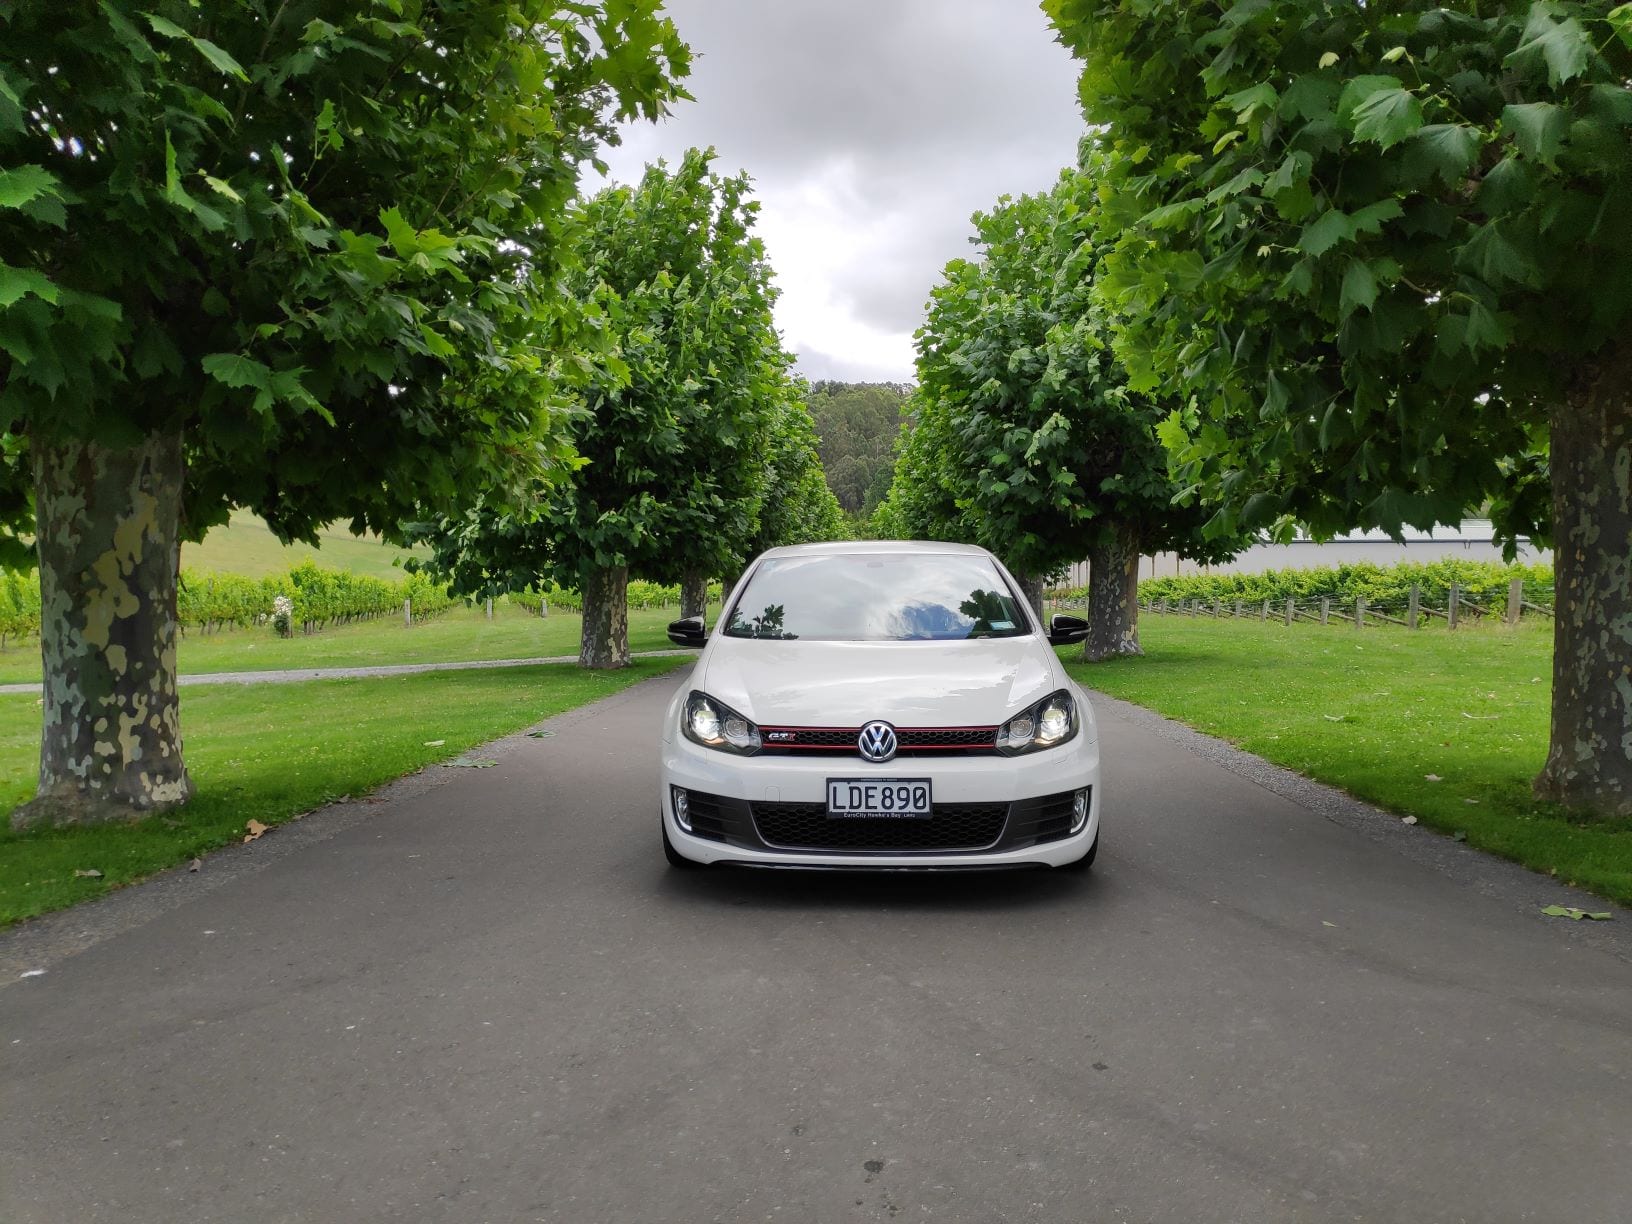 The Mark 6 Golf GTI at a winery